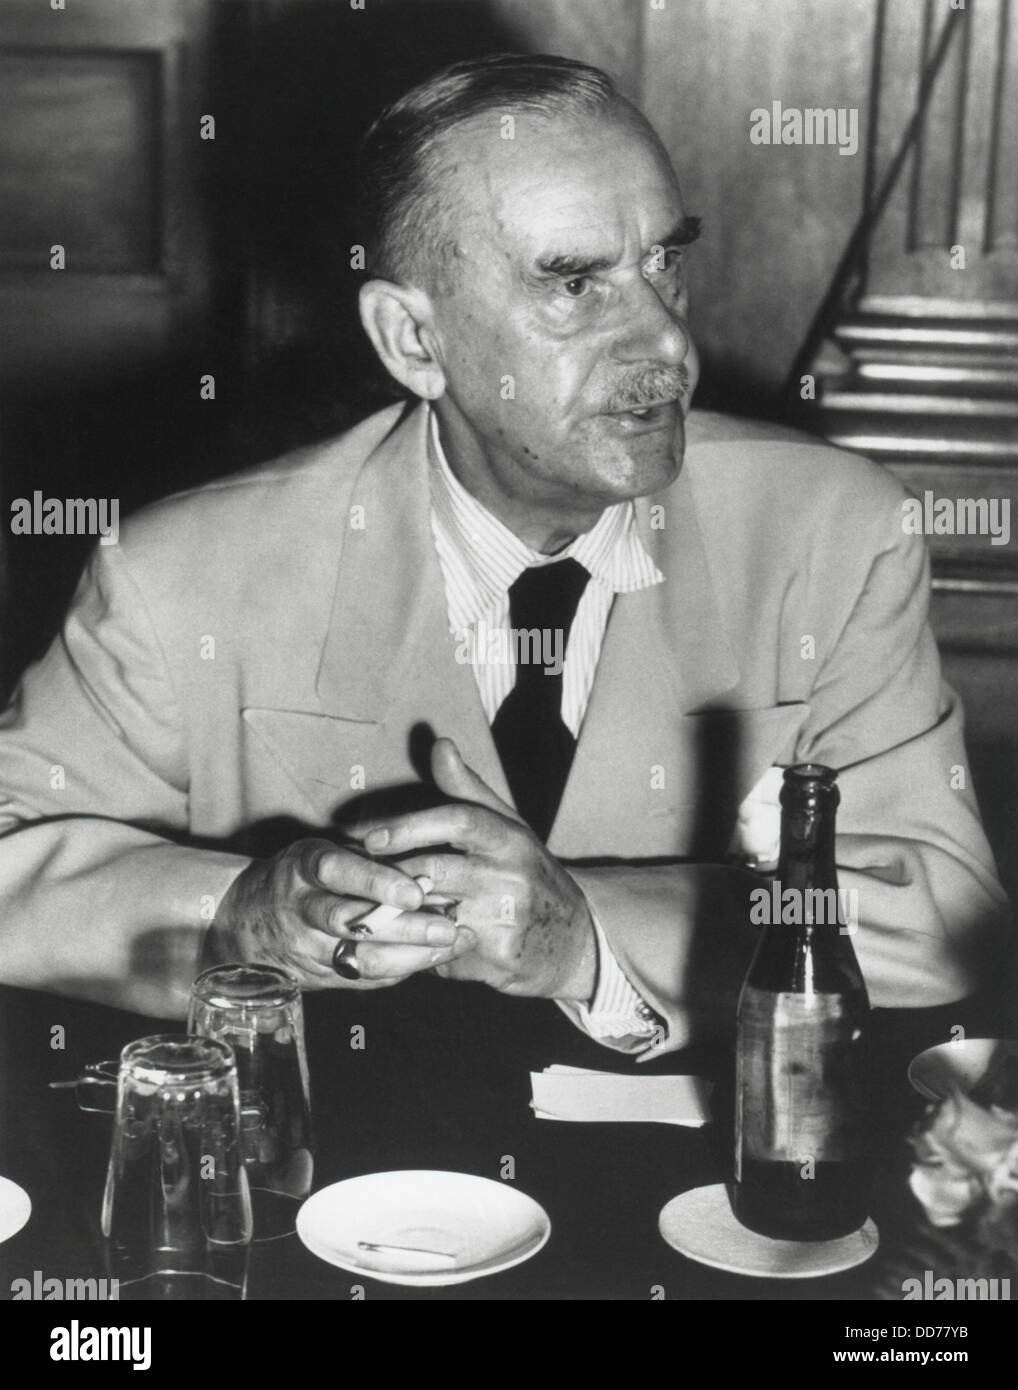 Thomas Mann, German novelist, short story writer, essayist, and 1929 Nobel laureate. Photo ca. 1940, possibly after his 1939 Stock Photo